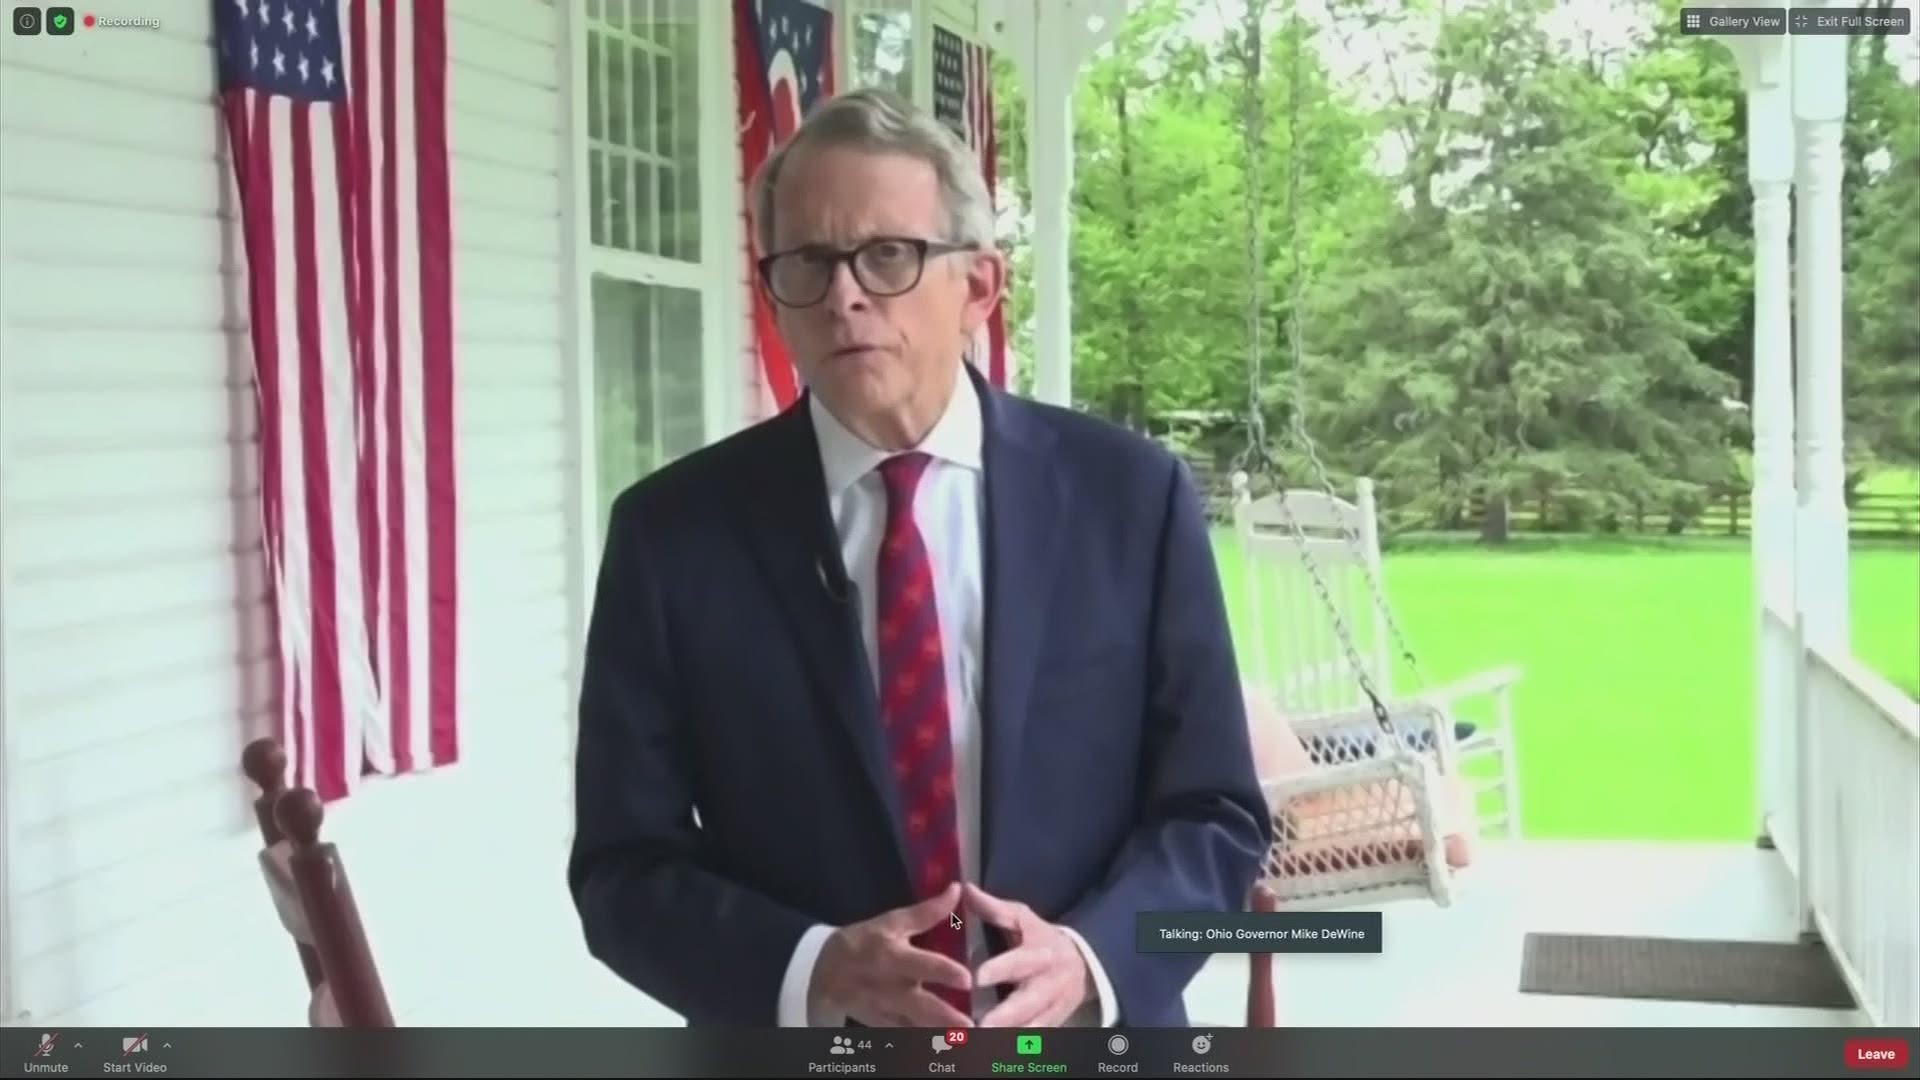 This week's Face the State features a one-on-one interview with Governor Mike DeWine about Ohio’s COVID-19 response.